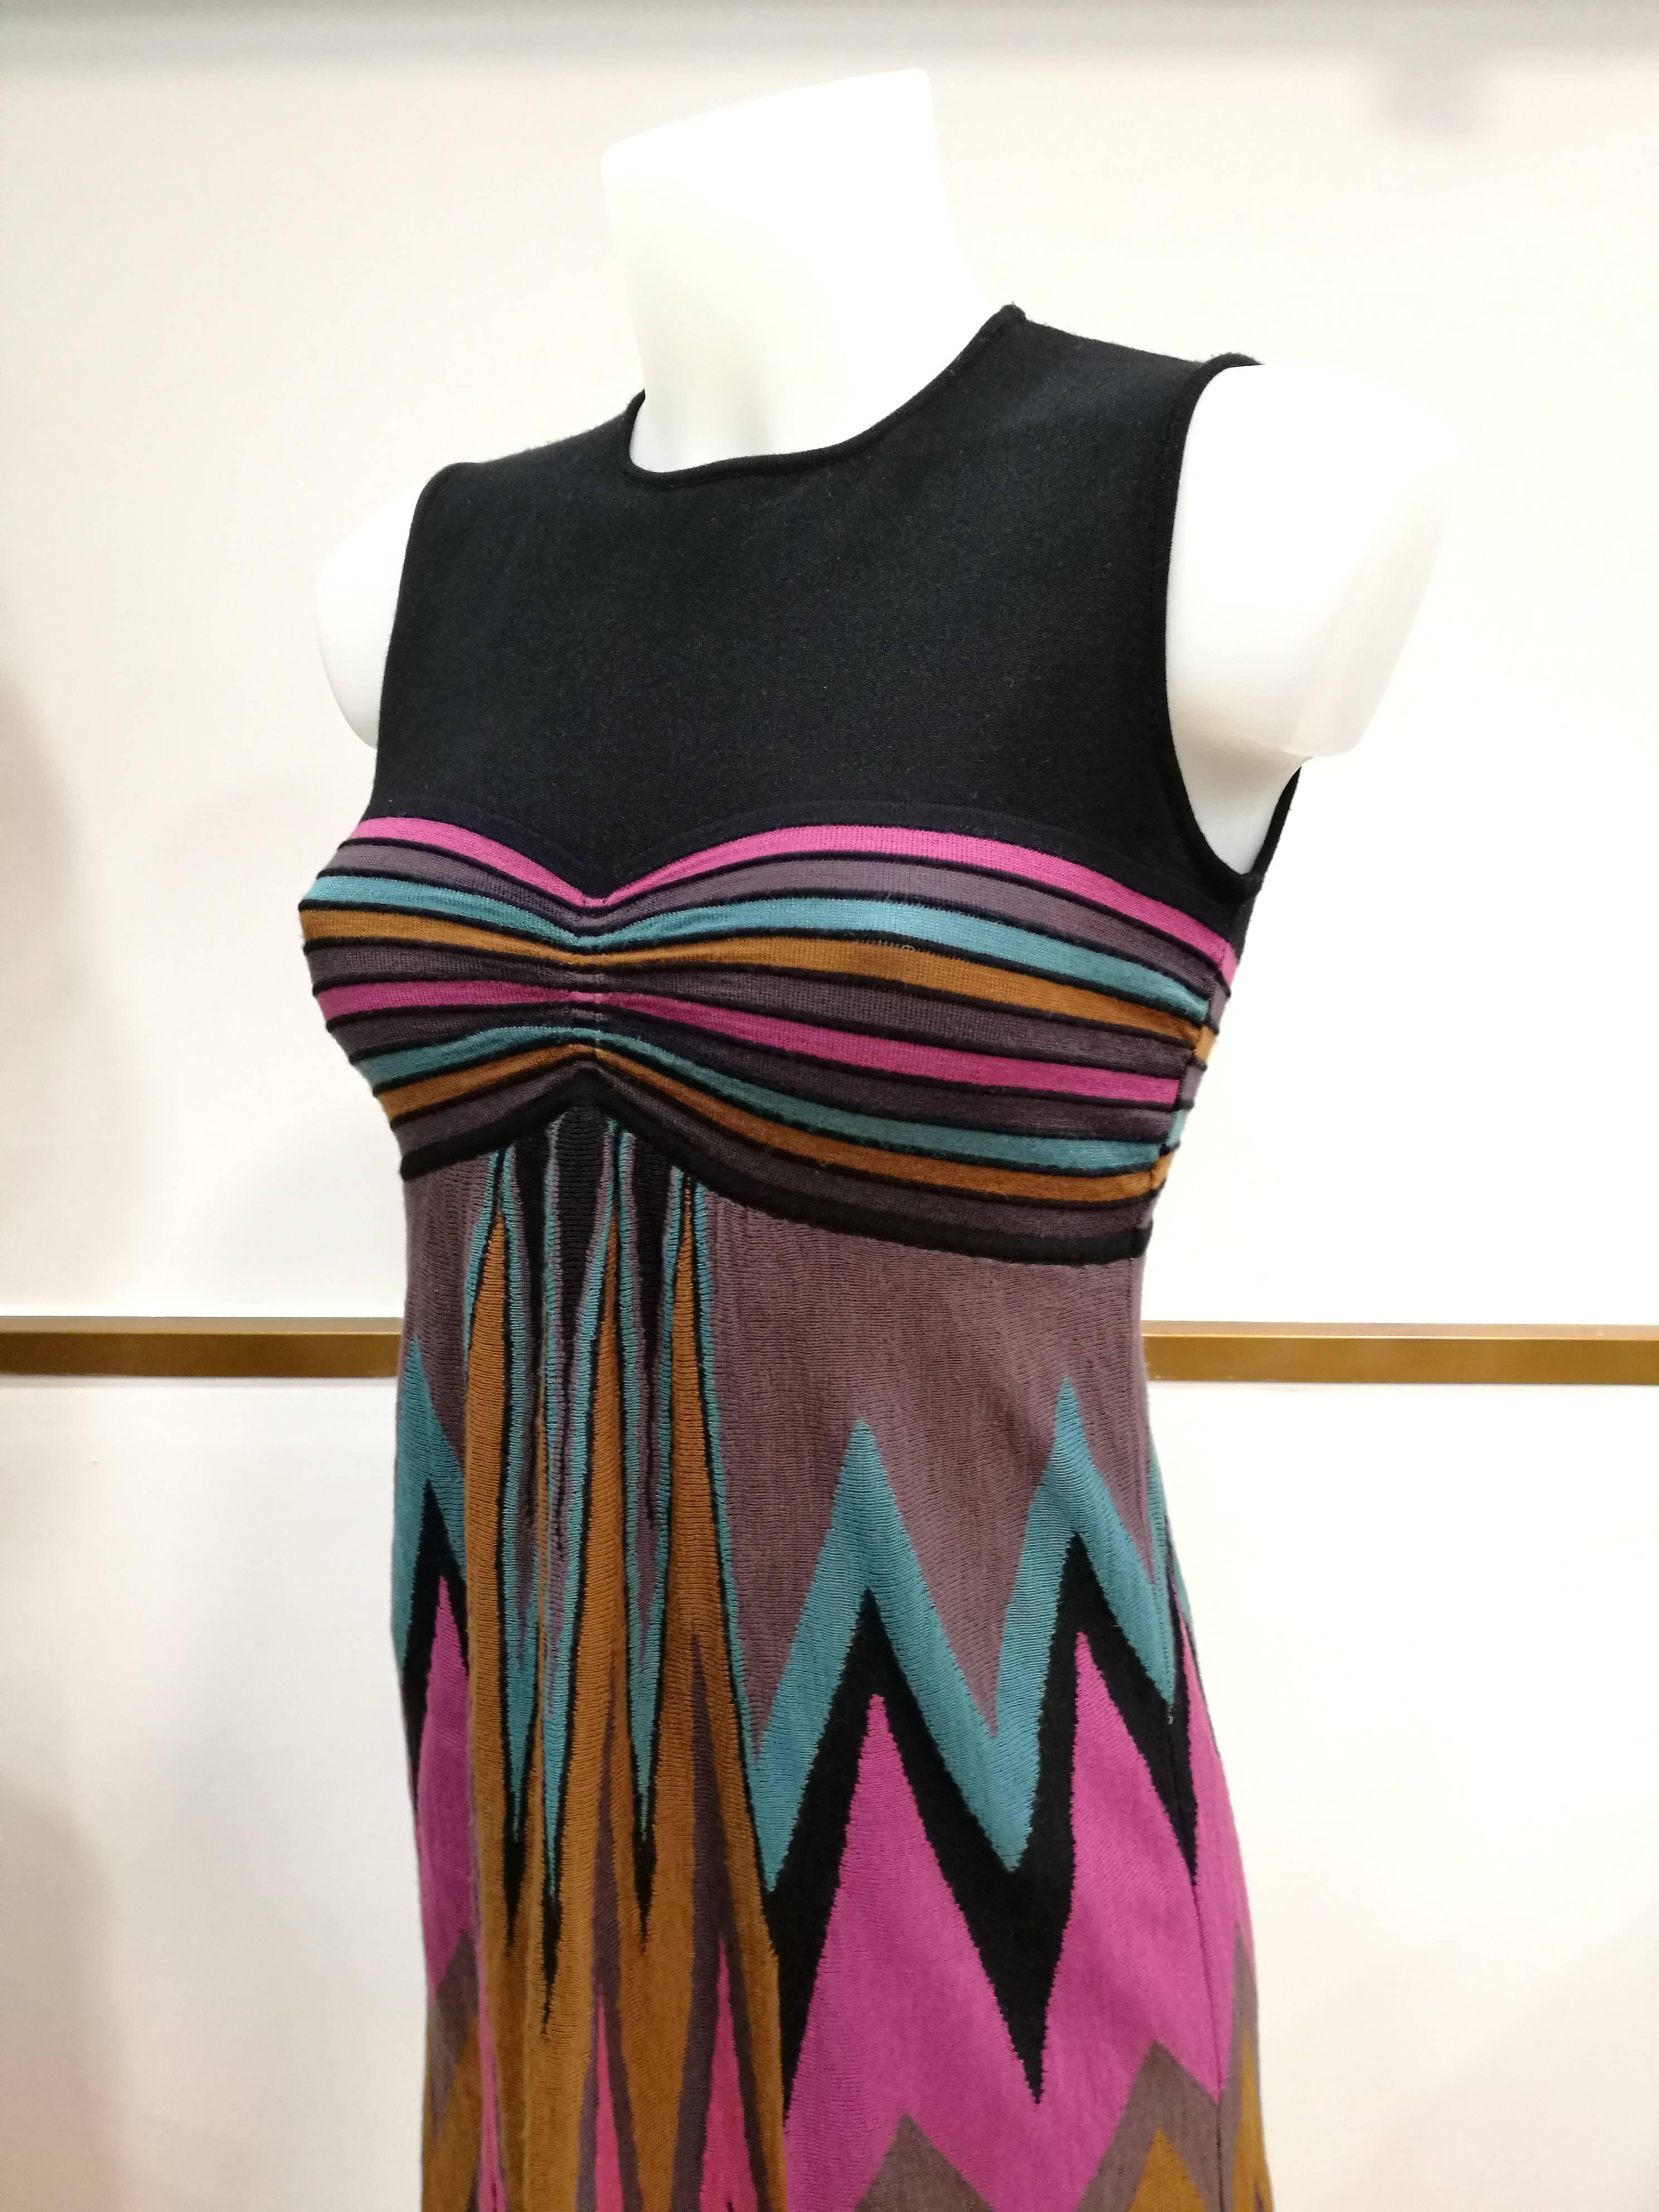 M by Missoni multicolour Dress

Totally made in italy in italian size range 42